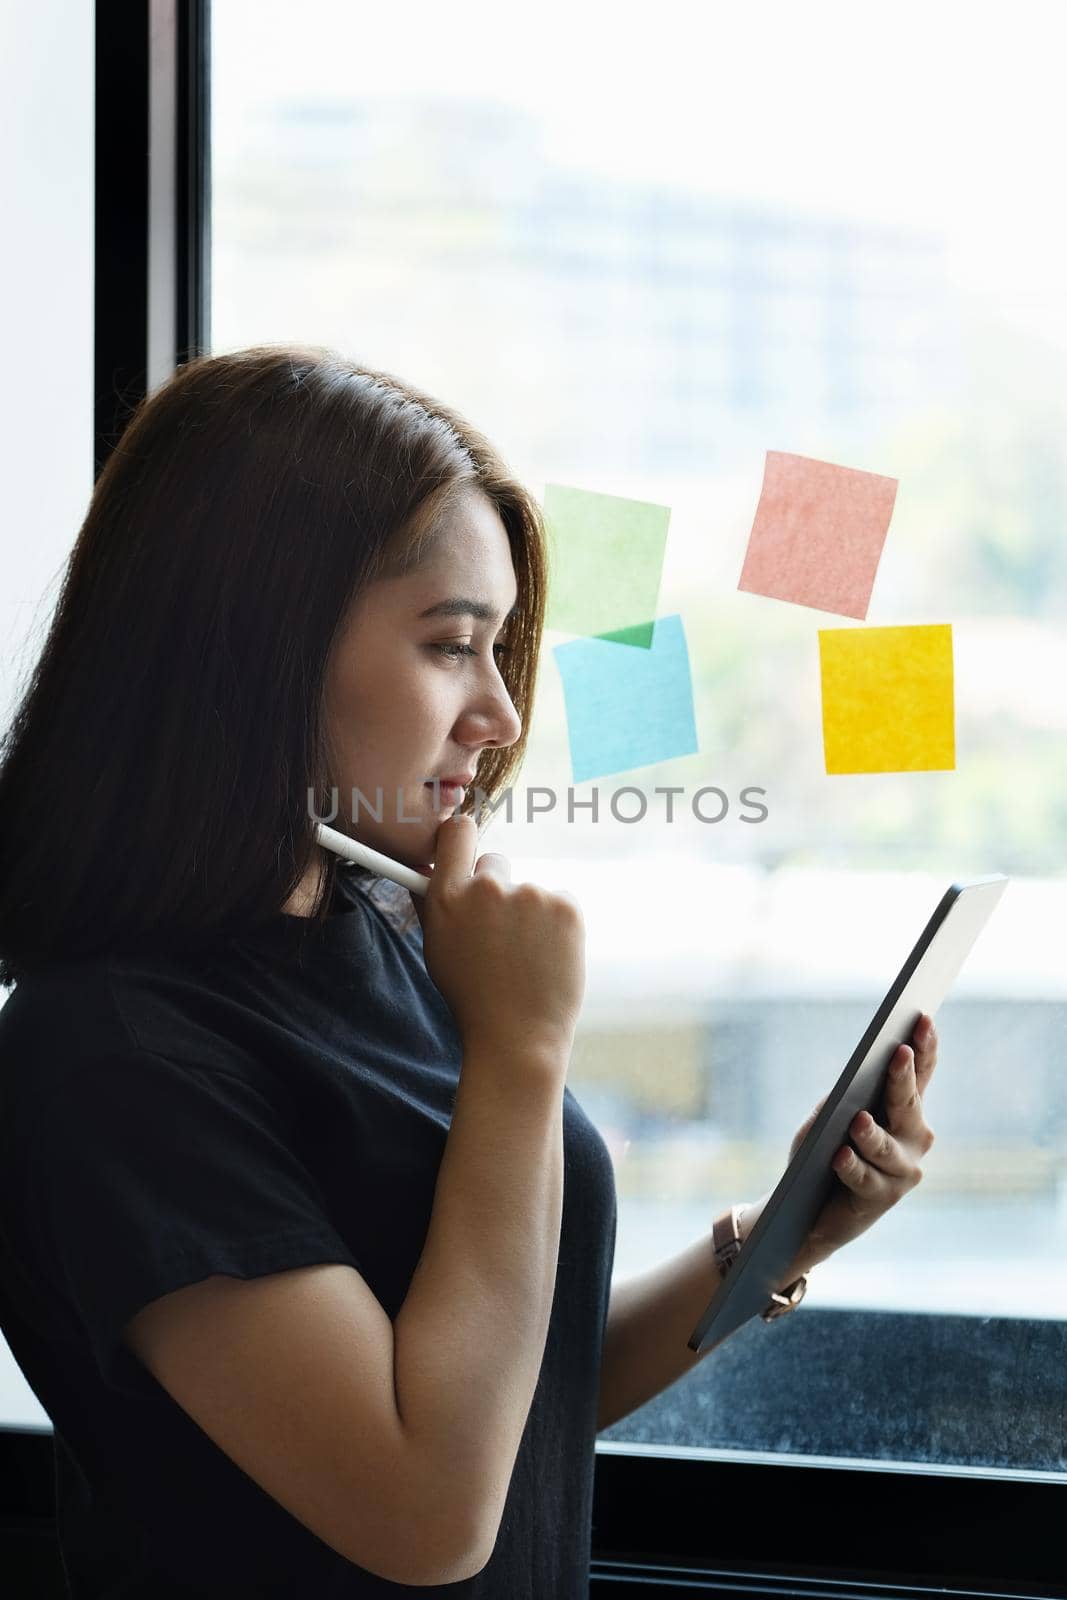 A female company employee uses a tablet and notepad to analyze company budgets. by Manastrong